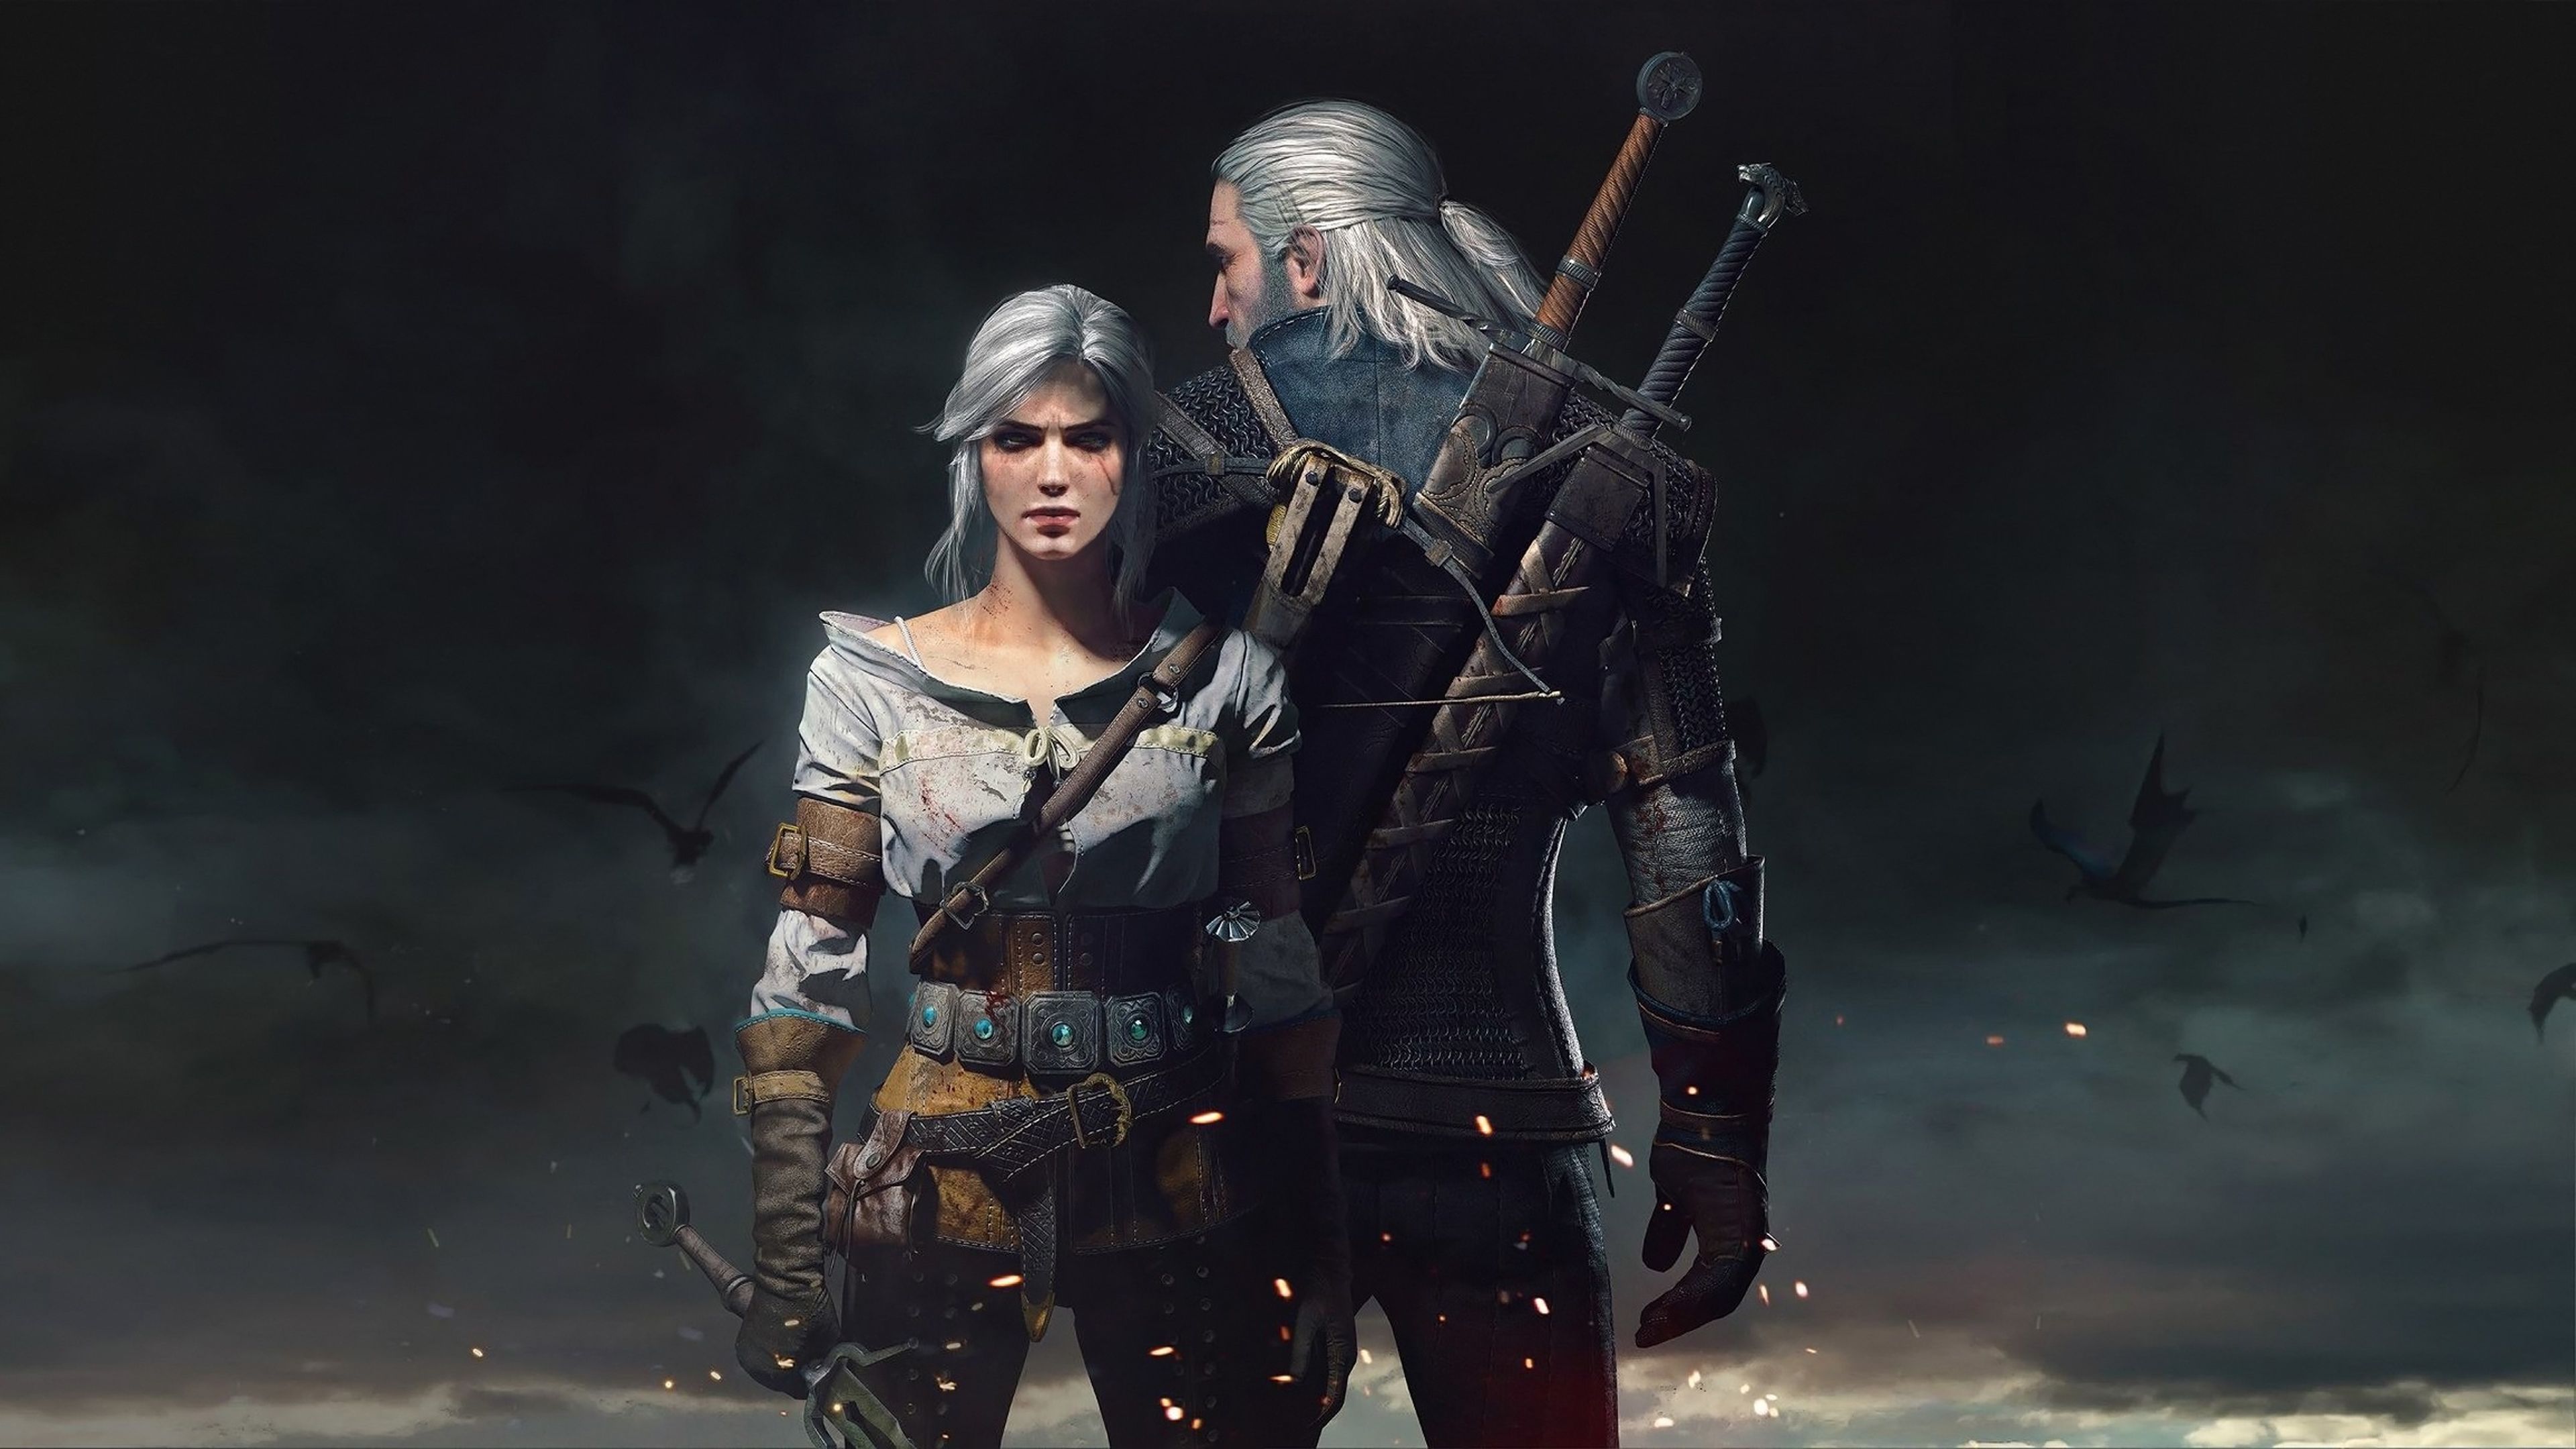 The Witcher 3 Wild Hunt - PC-PS4-X1 - Game of the Year edition (Launch Trailer) (Spanish)